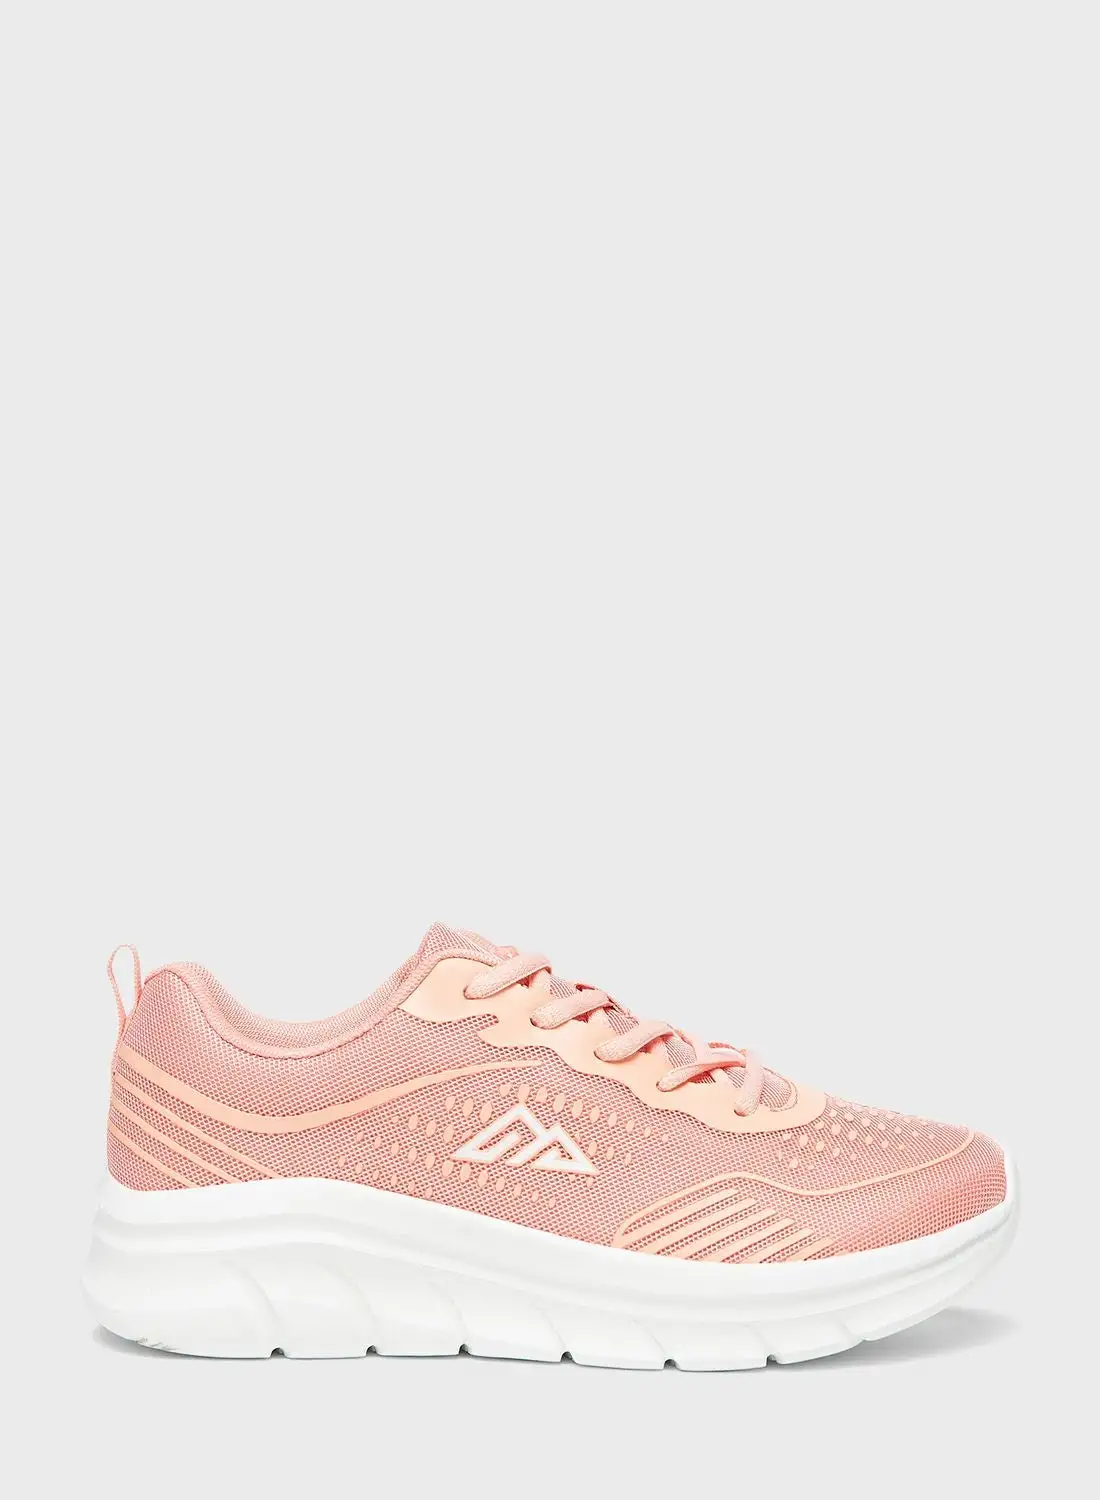 Oaklan by Shoexpress Lace Up Low Top Sneakers